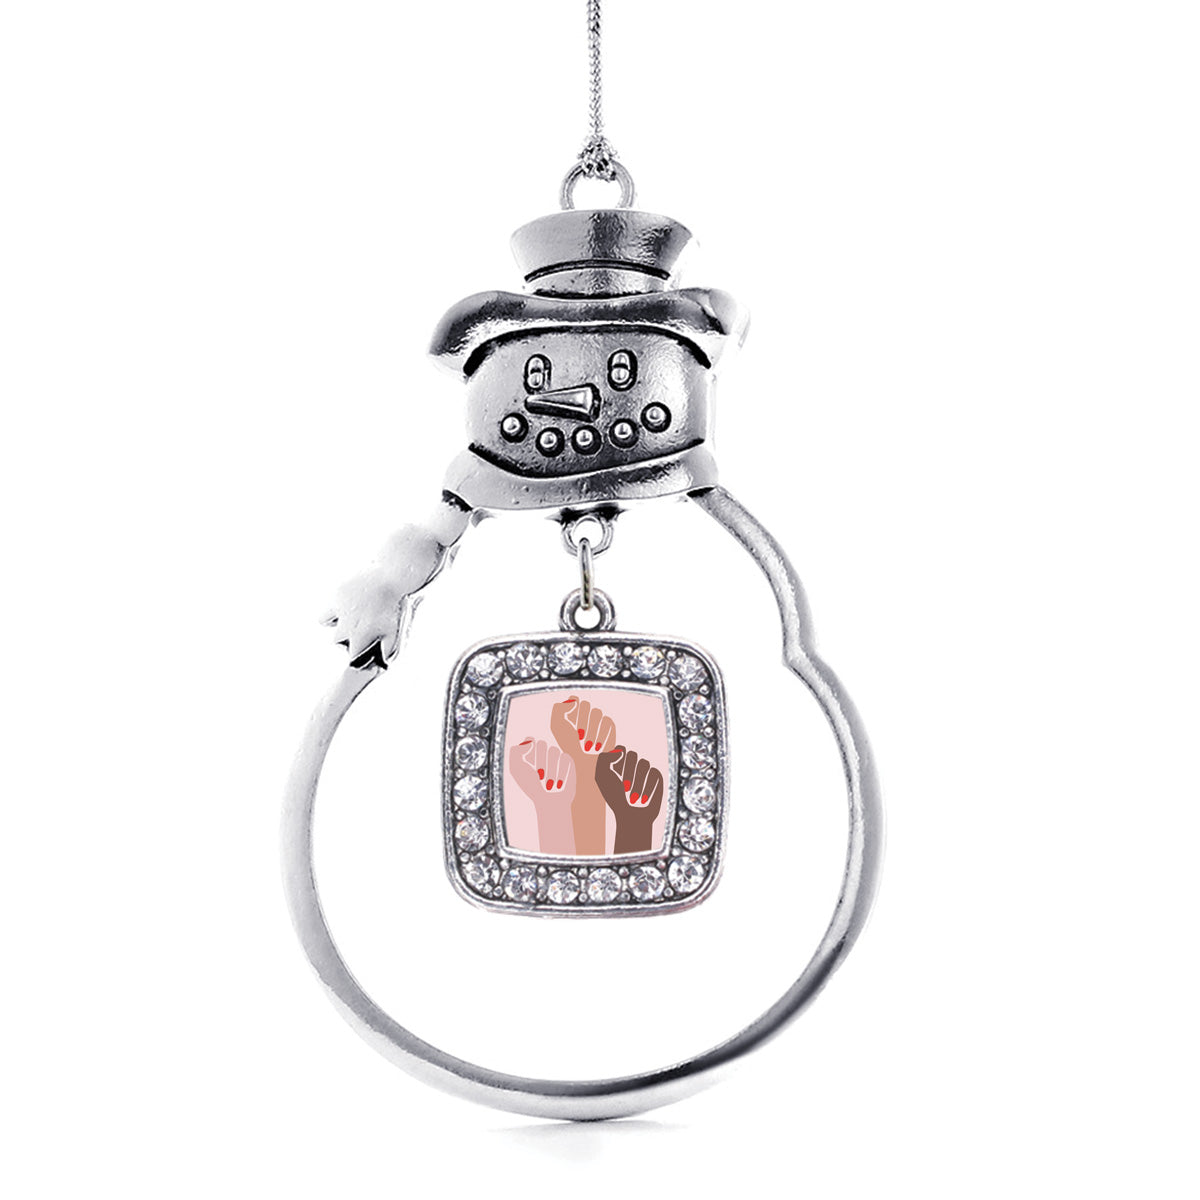 Woman's March Unite Square Charm Christmas / Holiday Ornament